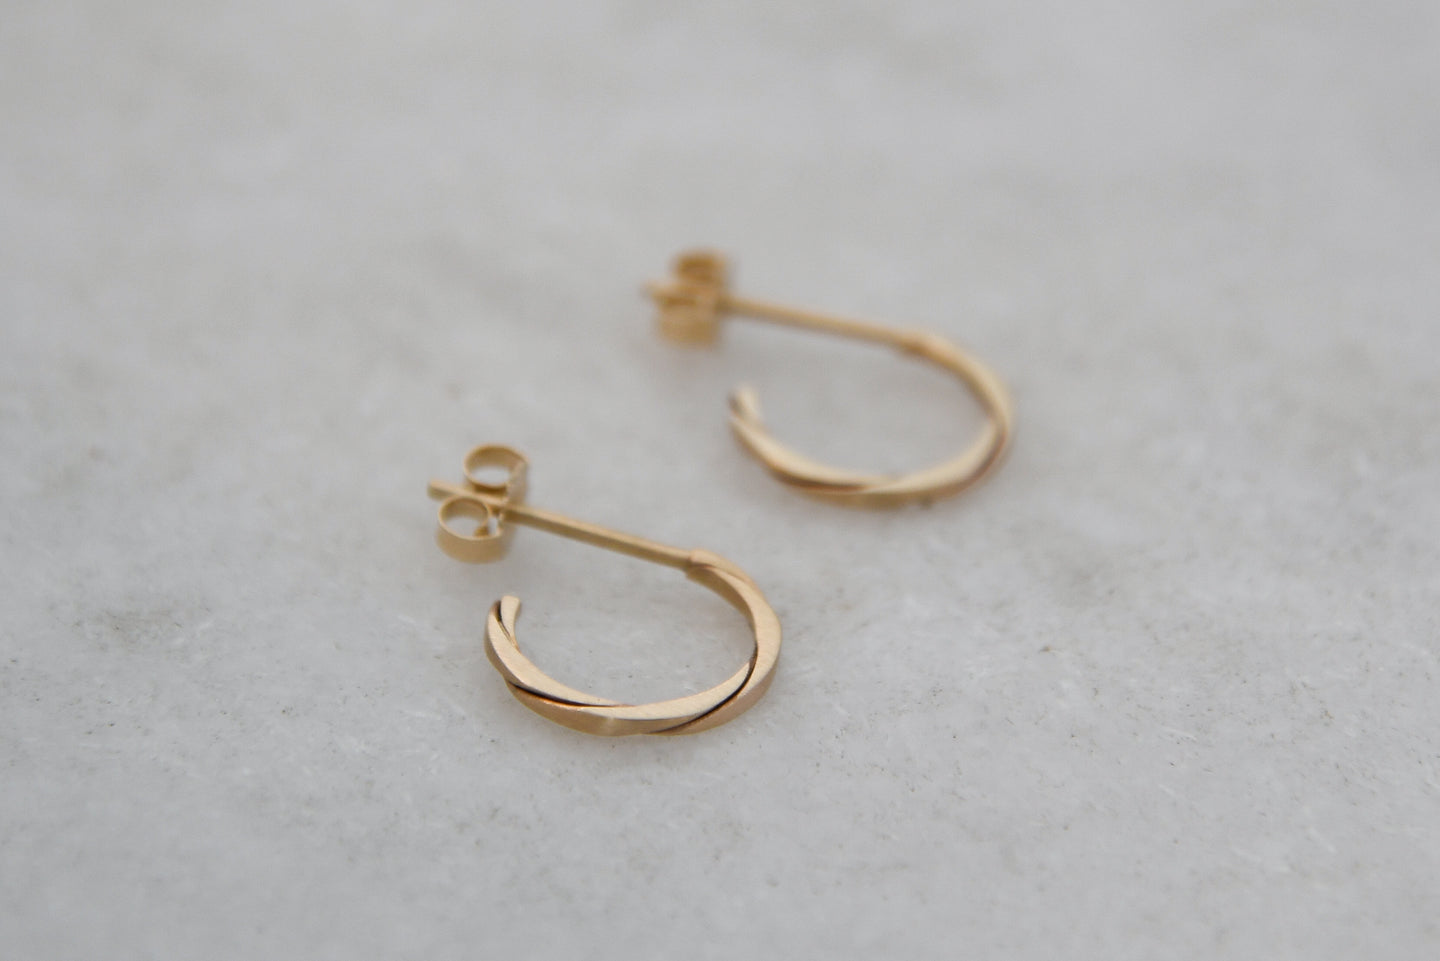 Twist Gold Hoops. Recycled gold earrings. Eco-Friendly jewelry